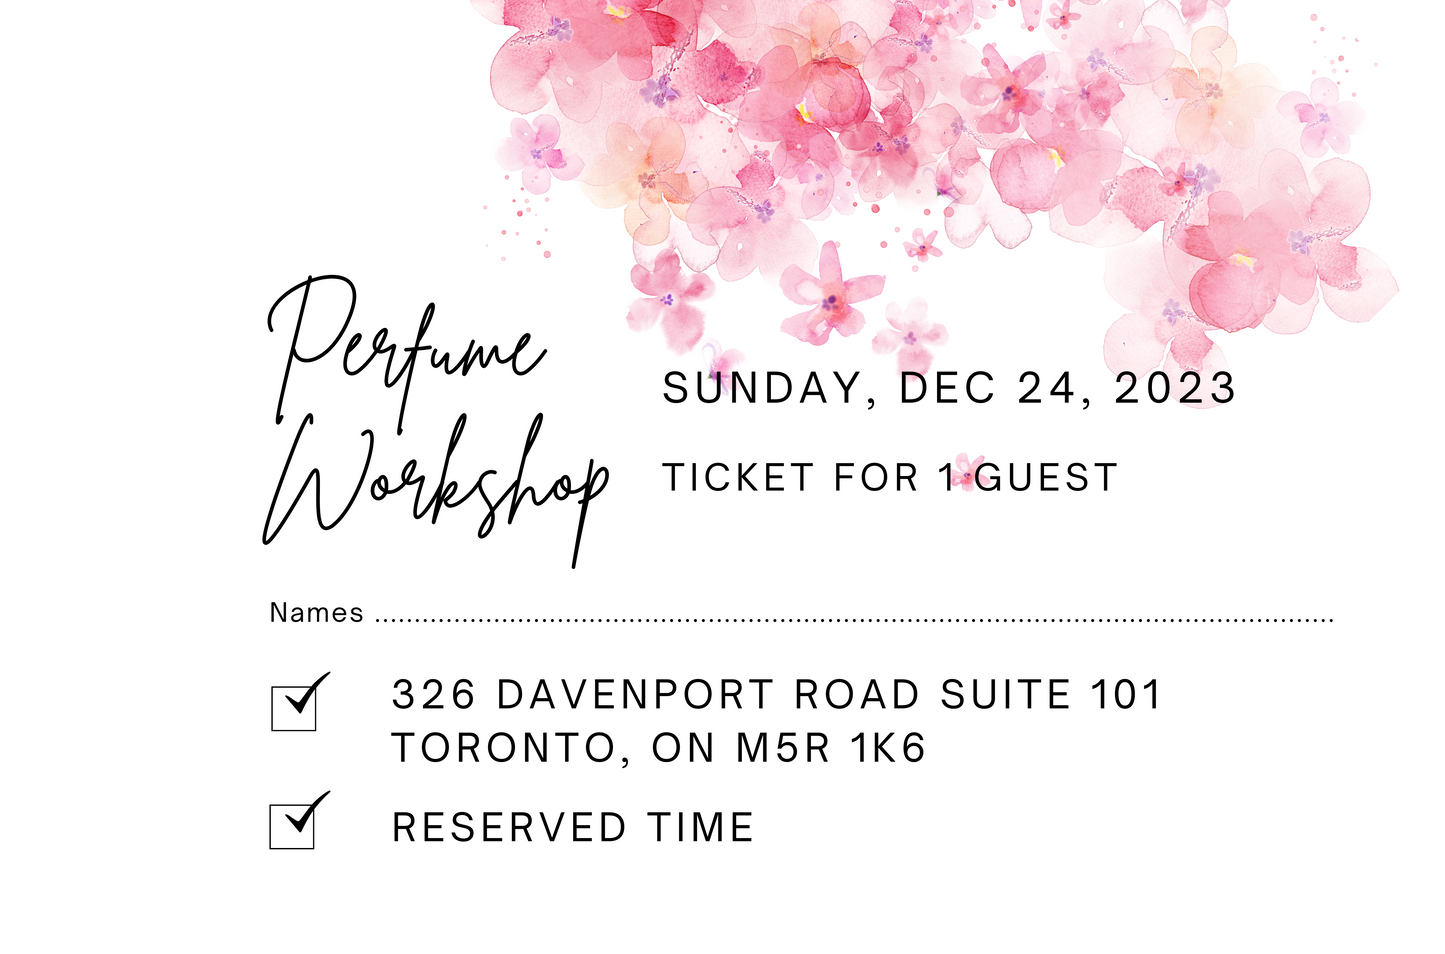 December 24th, 2023 Perfume/Cologne Workshop Session For 1 Guest